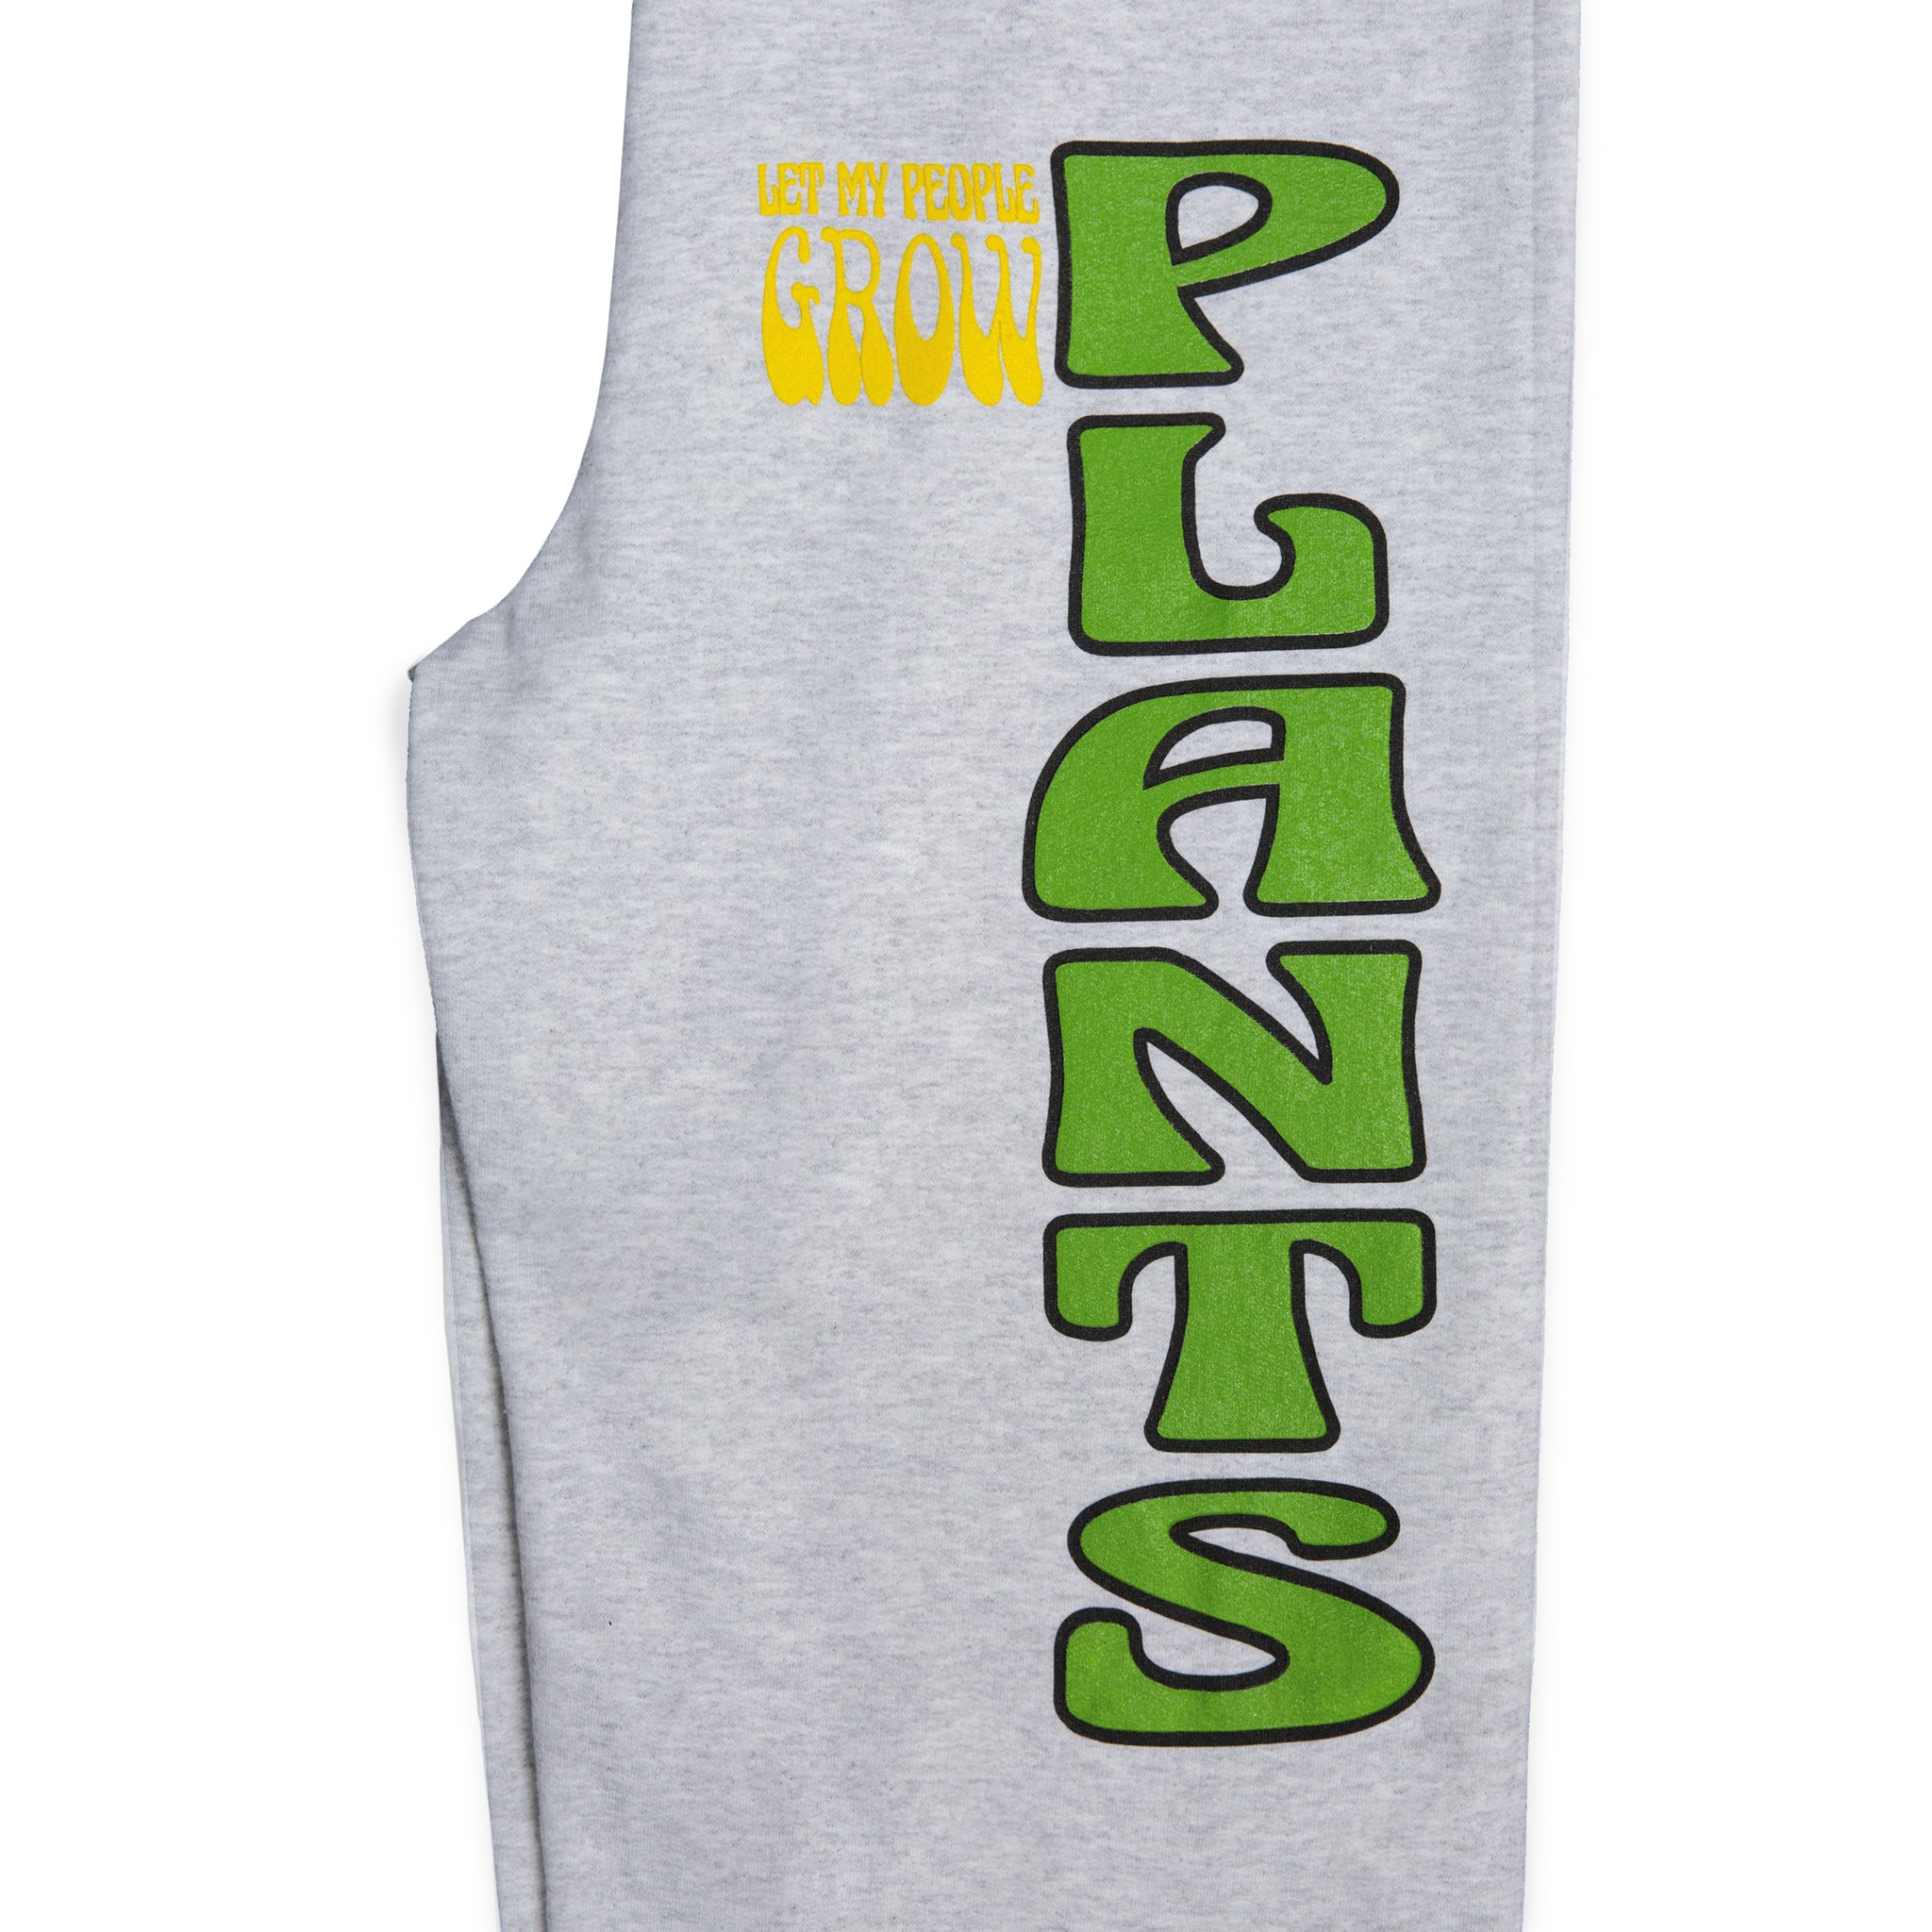 Close-up view of left leg graphic print Made in Paradise World Drug Trade Collection "PLANT LIFE" sport grey sweatpants